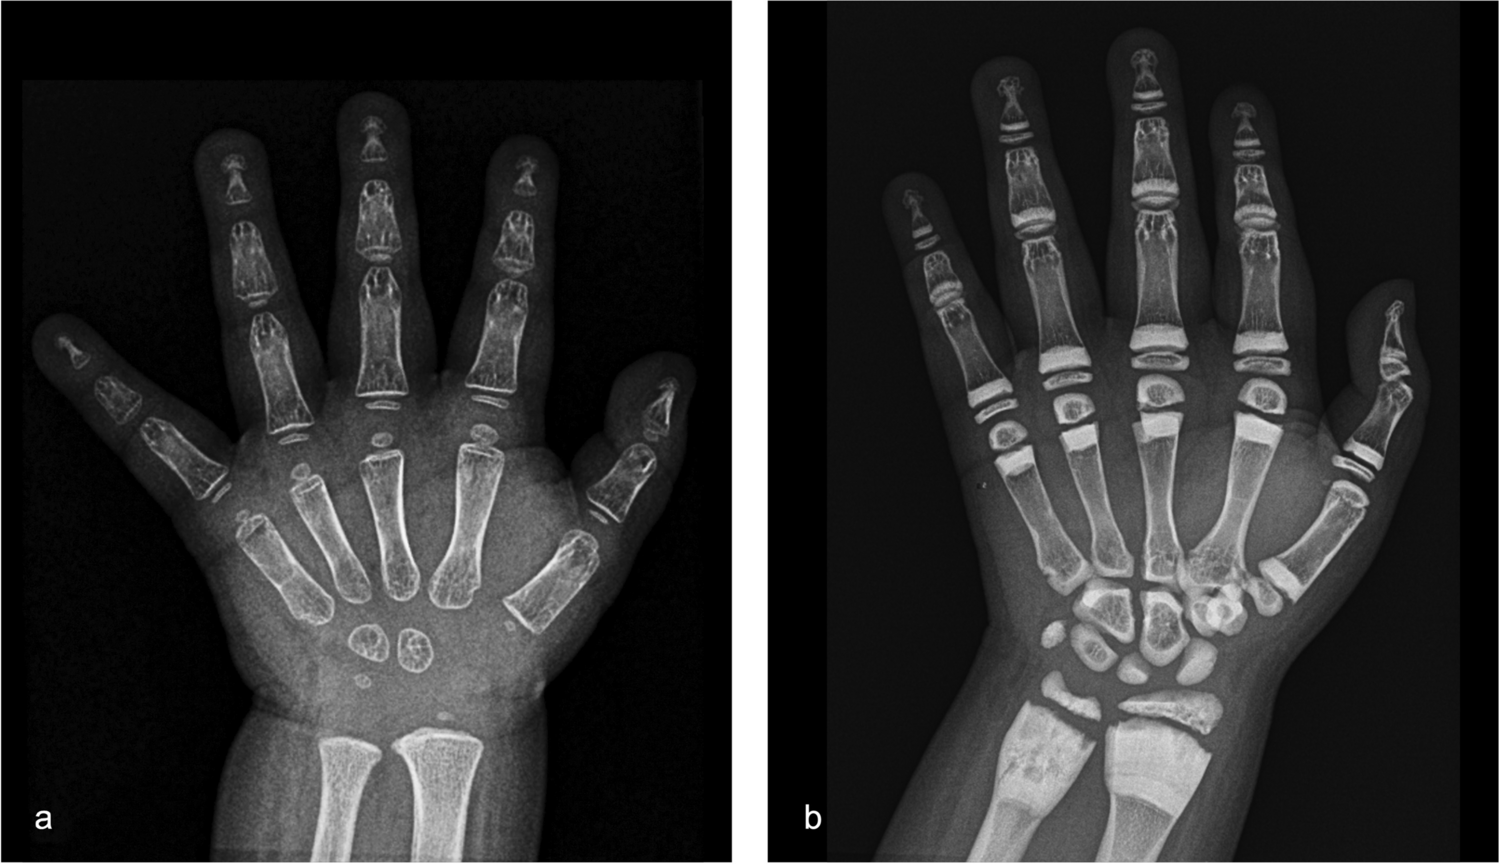 Denosumab-induced bone changes in a child: a case report